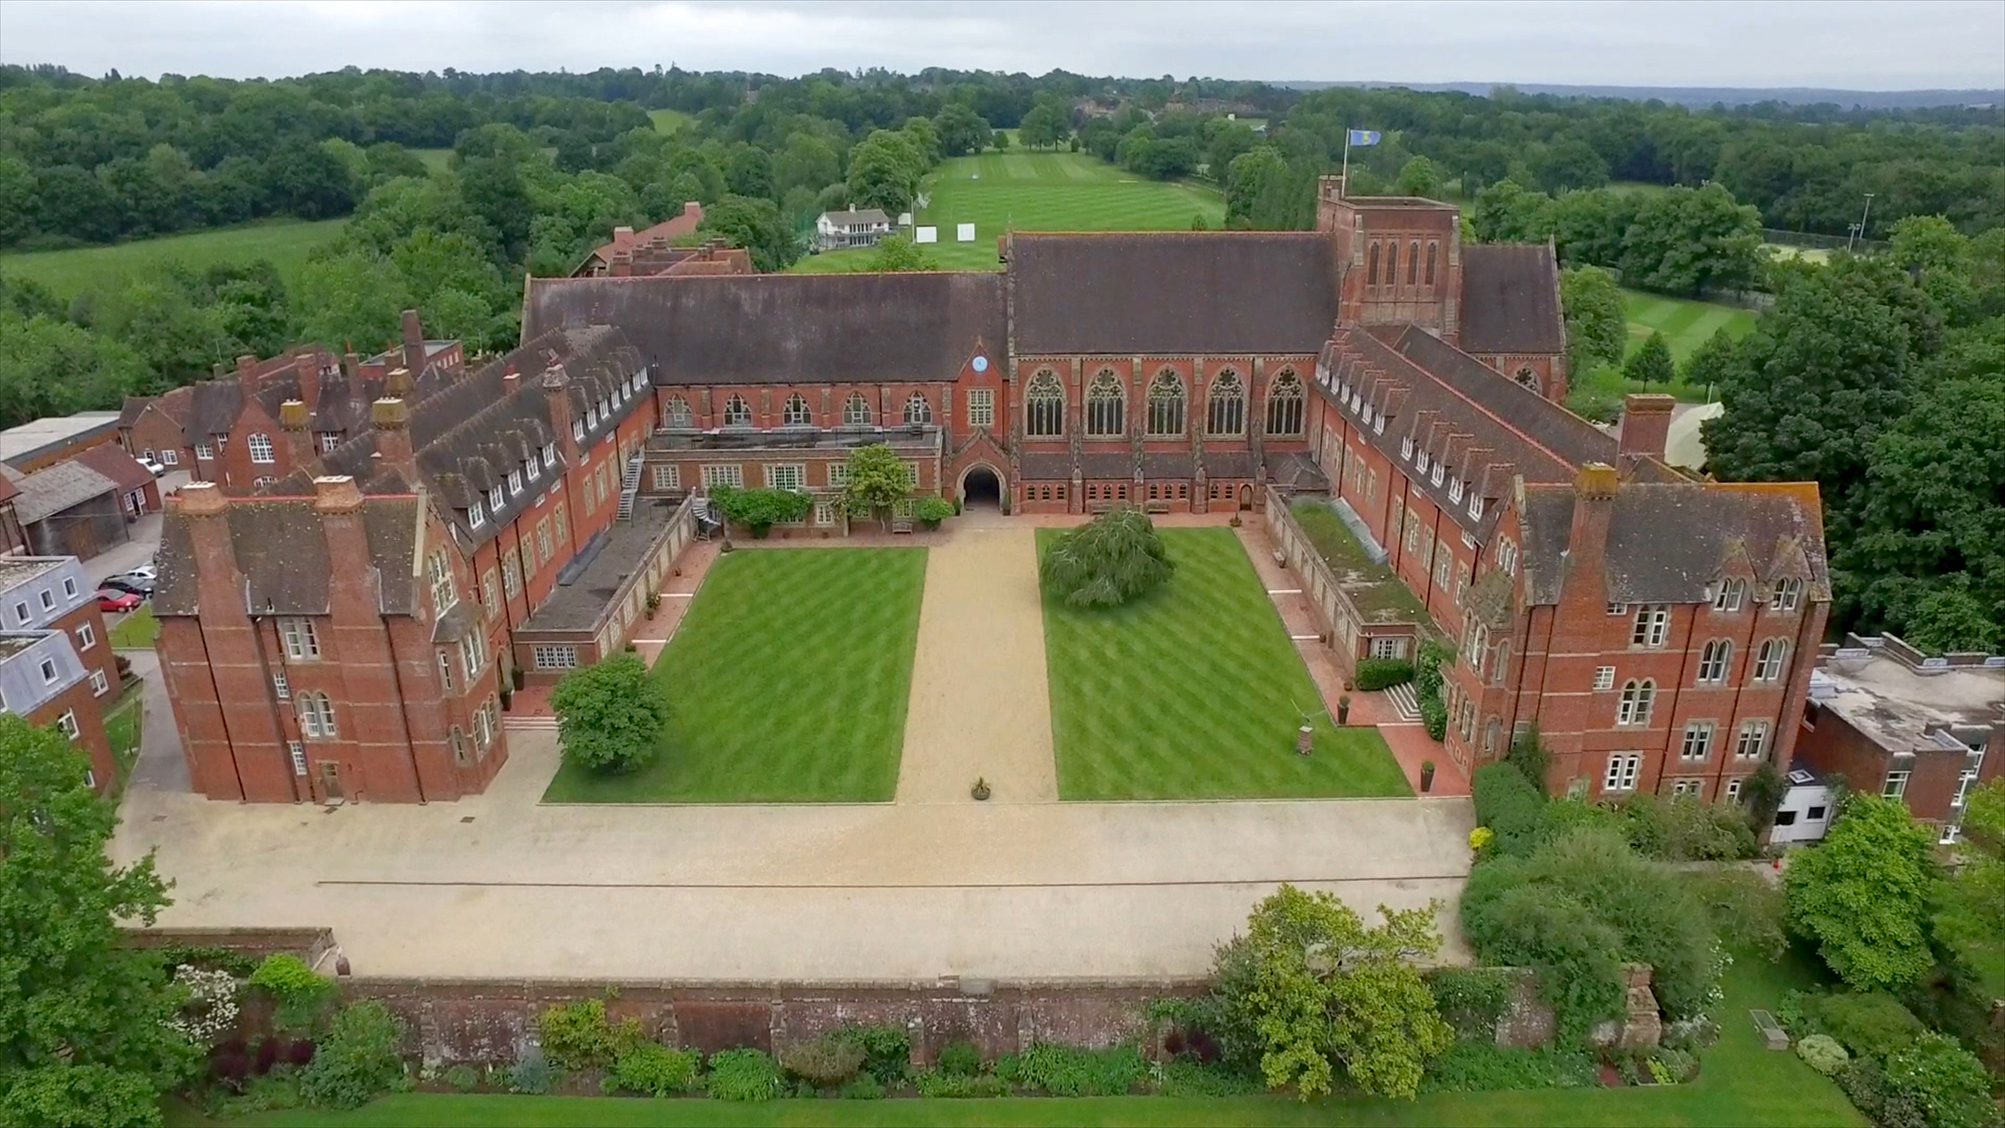 Aerial view of the main school building at Ardingly College